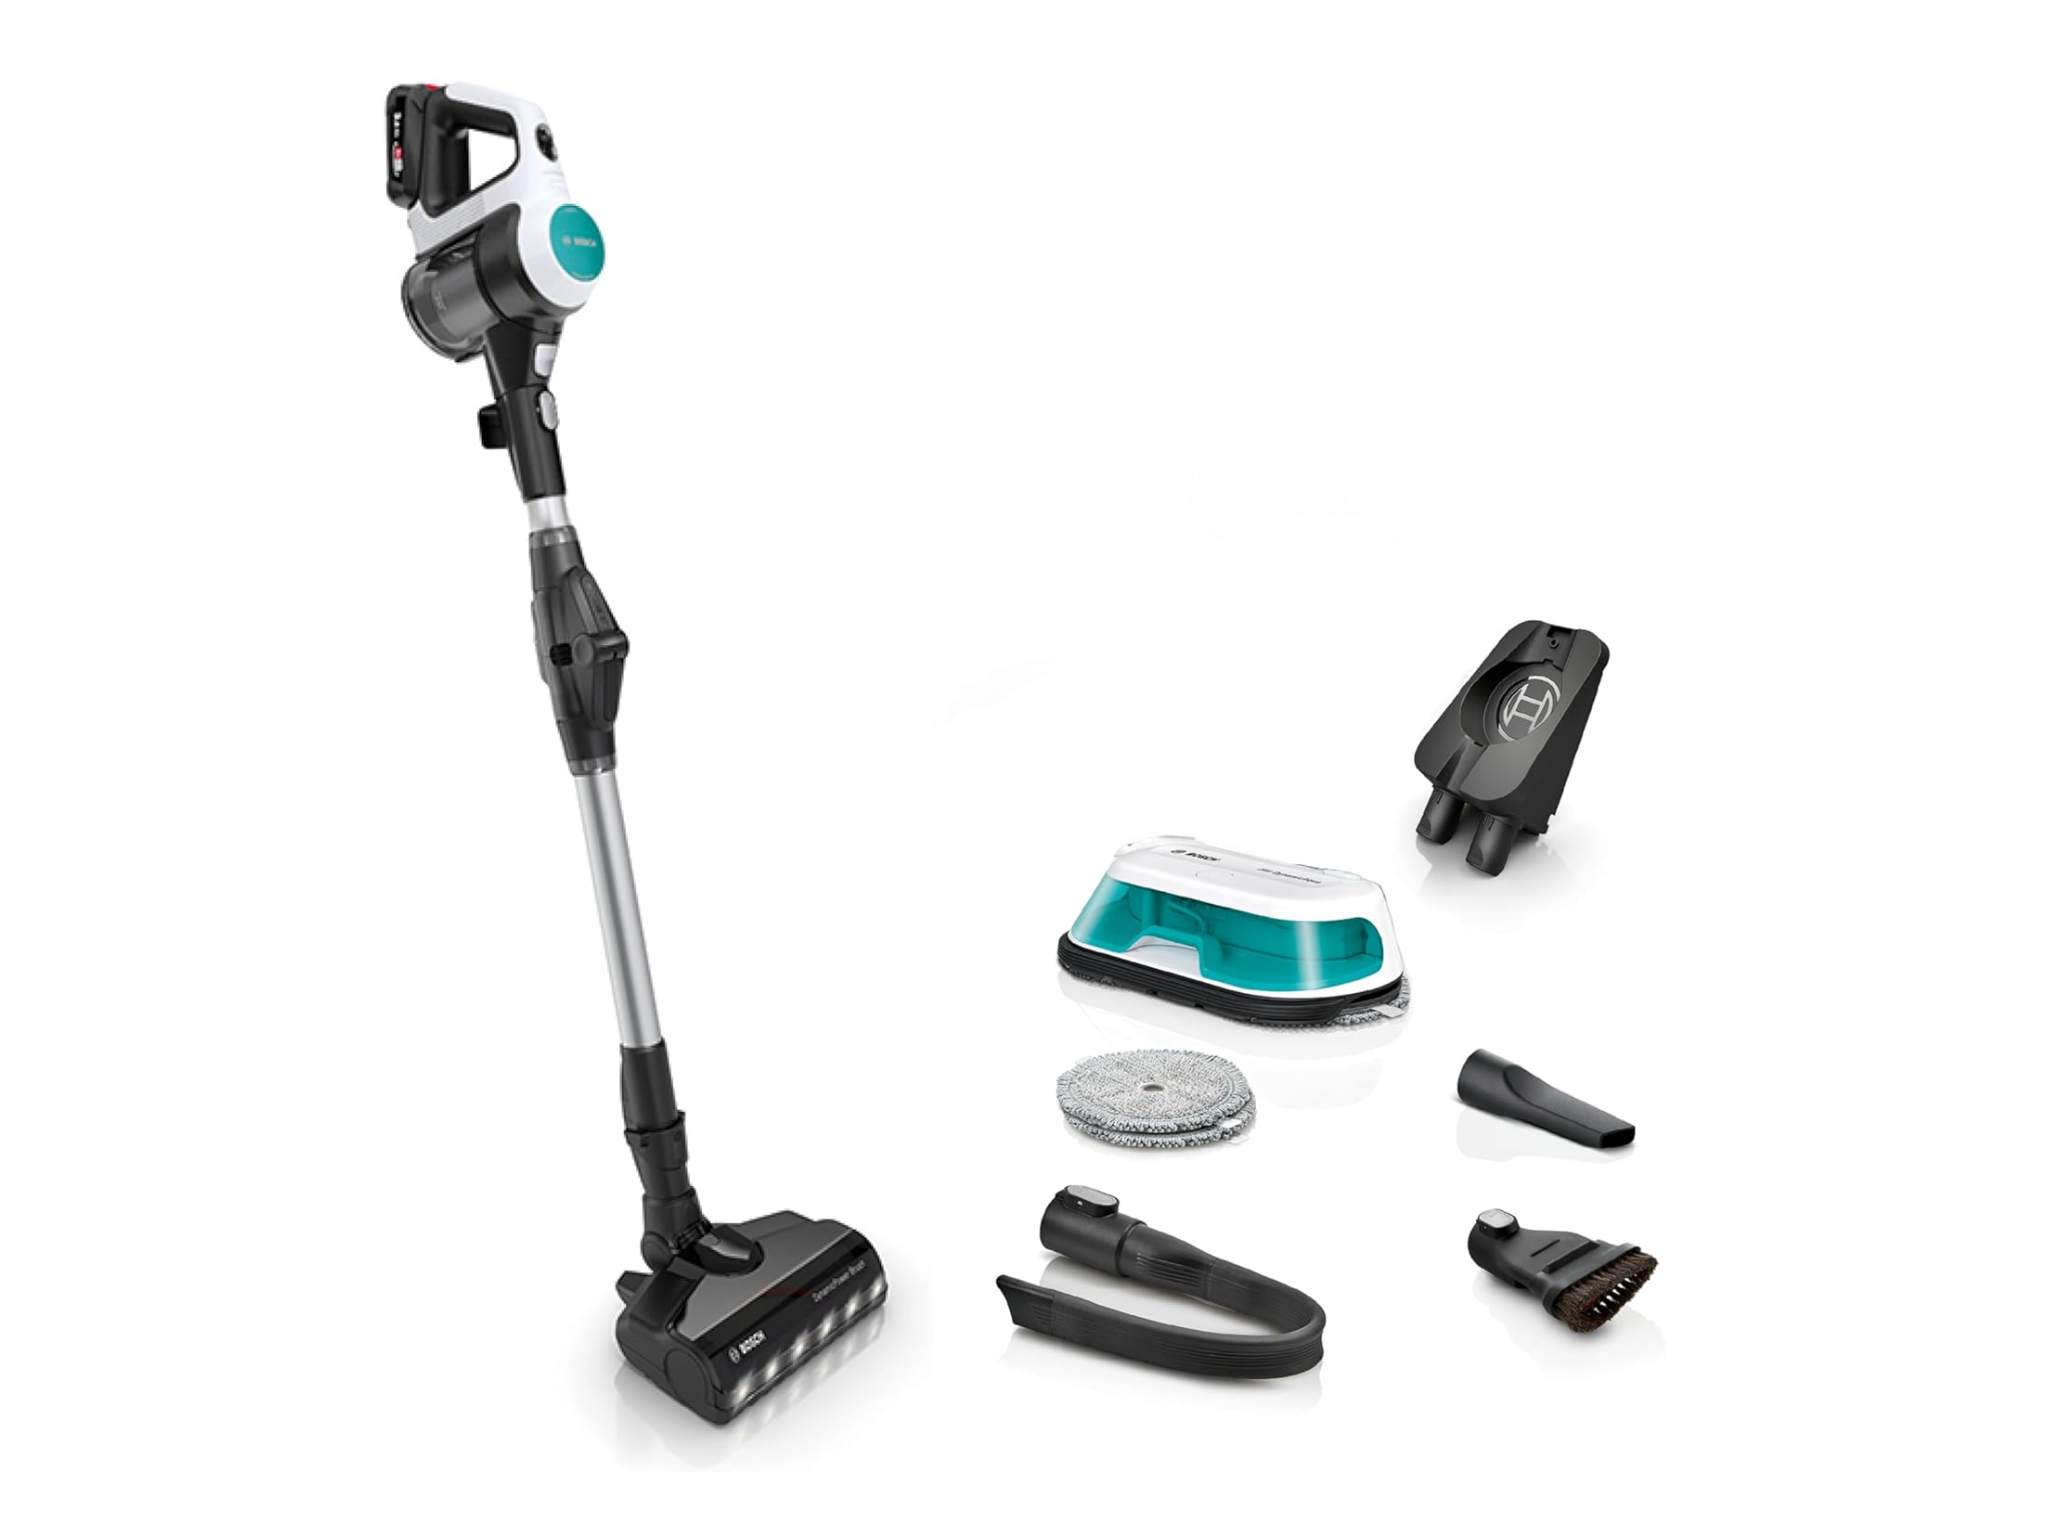 bosch-2-1-cordless-vacuum-review-indybest.png